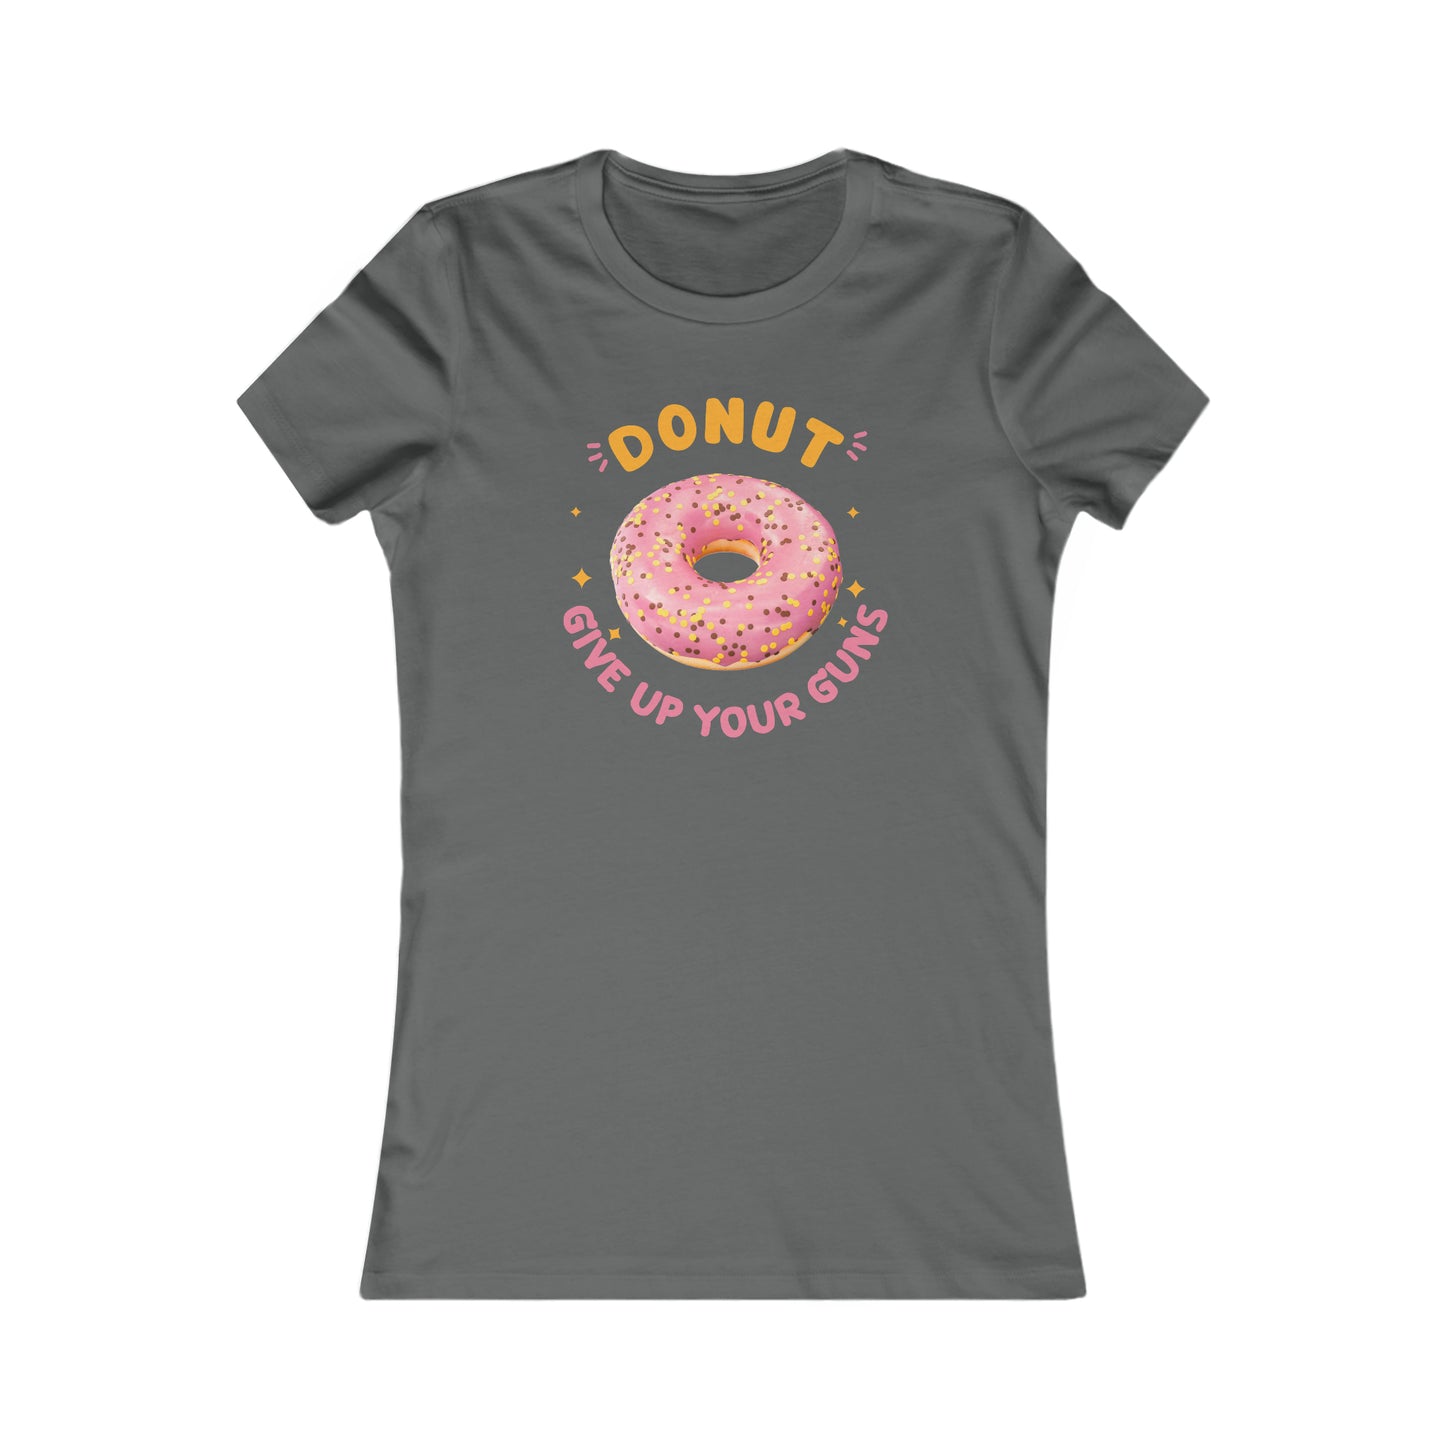 Donut Give Up Your Guns - Women's Favorite Tee